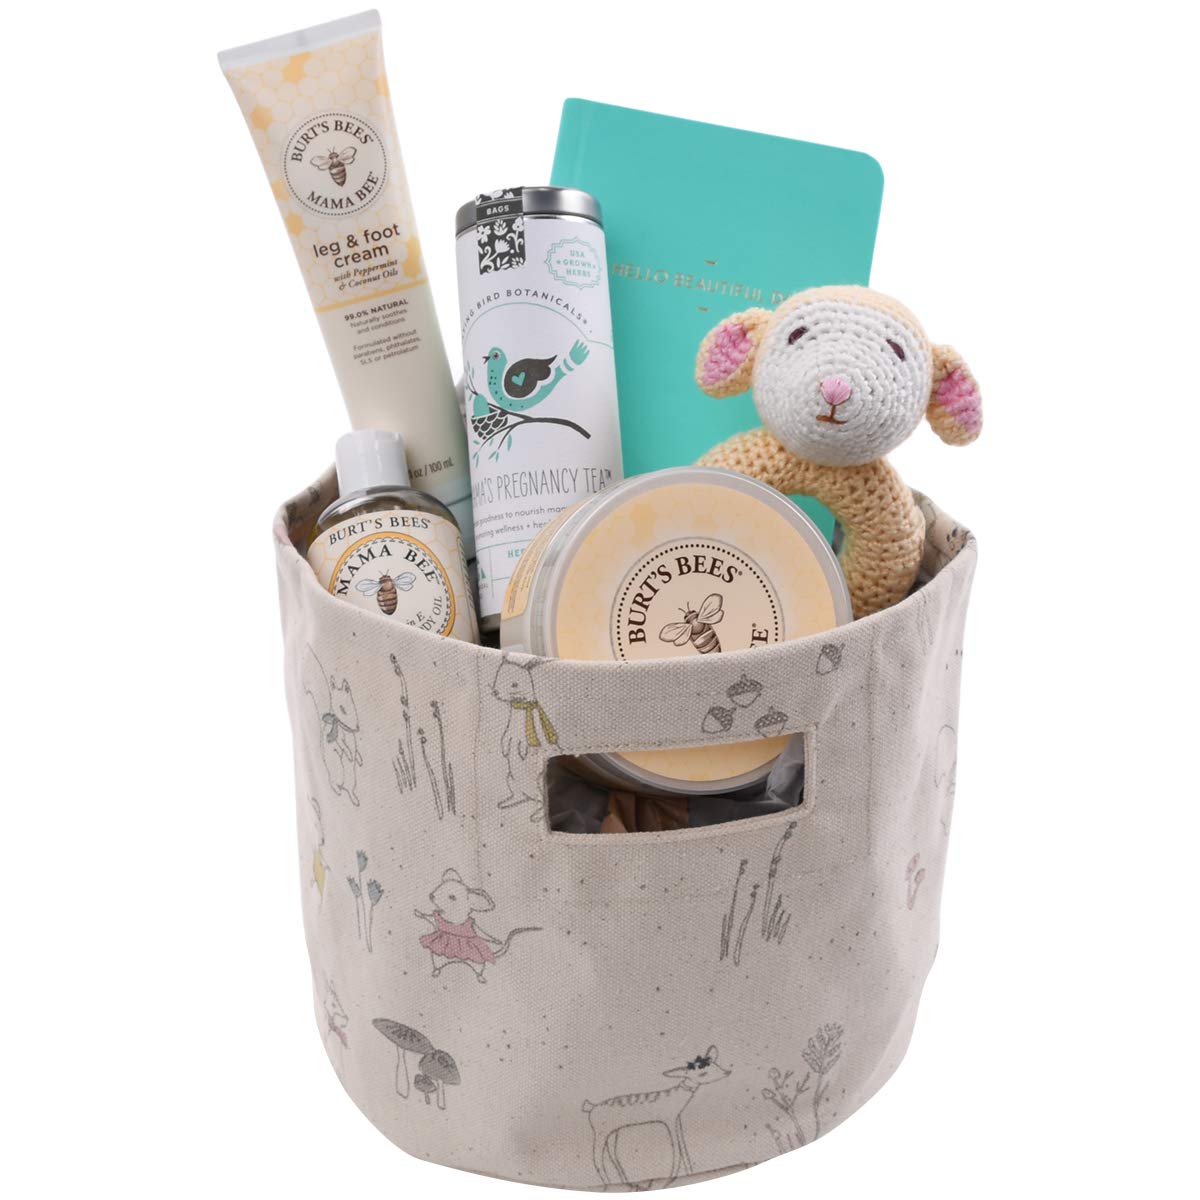 The Best Pregnancy Gifts for Your Wife According to Real Women -  FamilyEducation